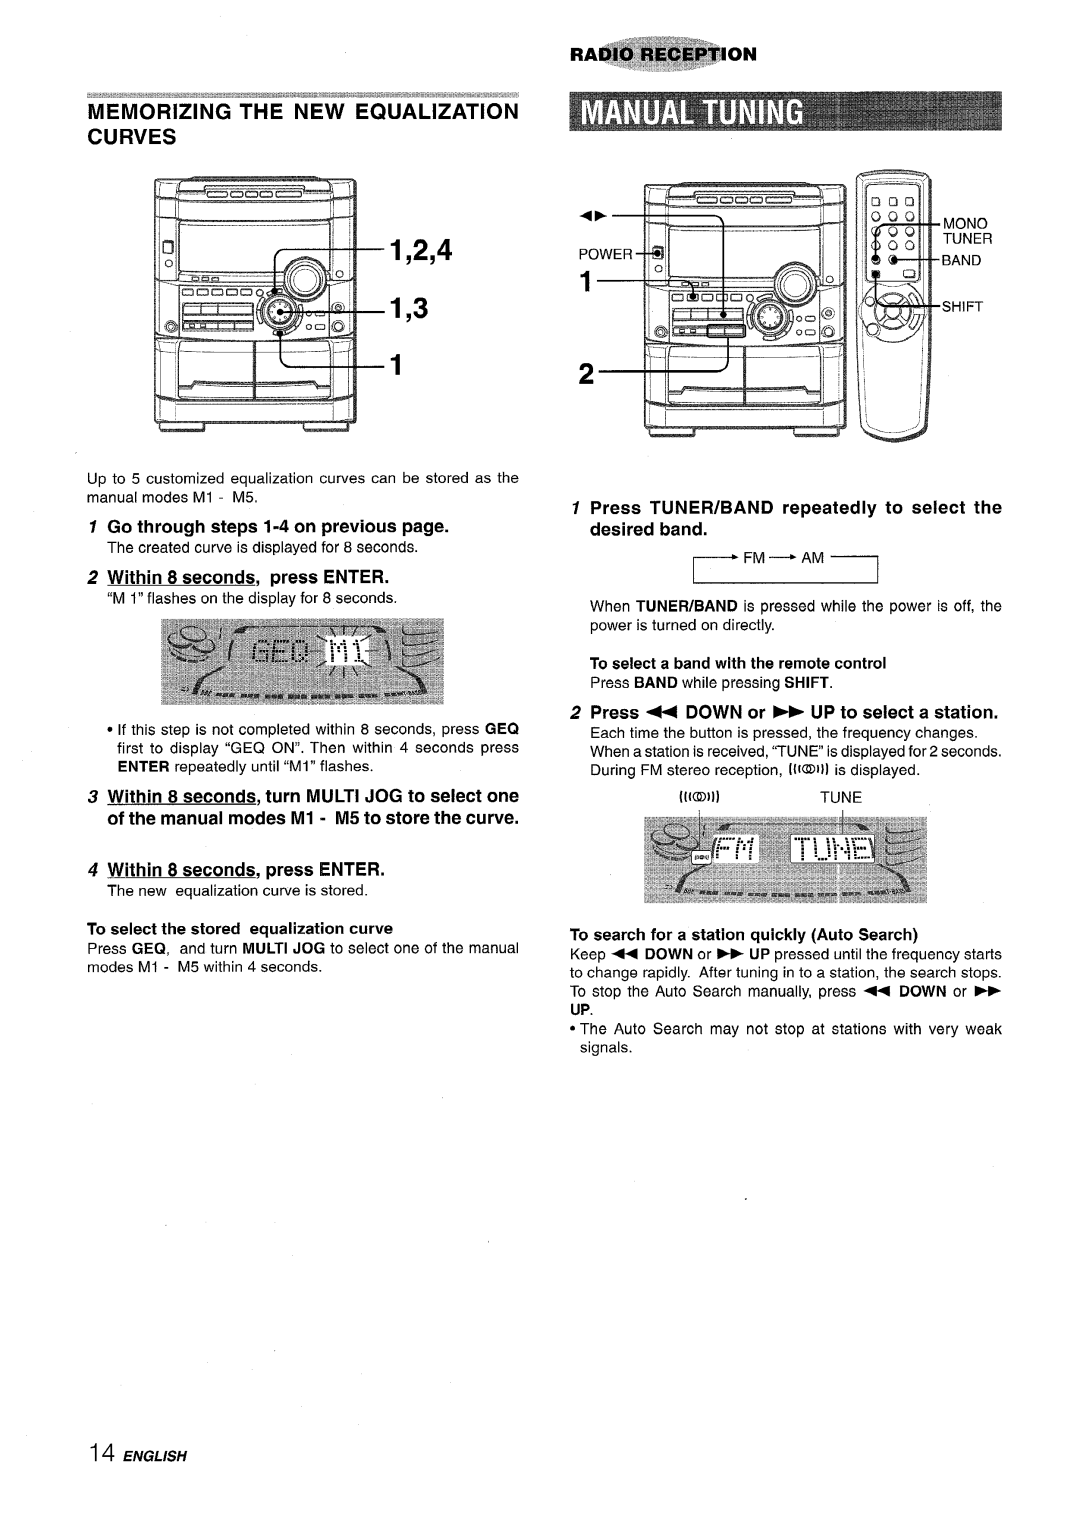 Sony NSX-A767 manual 1,2,4 1,3, Memorizing The New Equalization Curves, Go through steps 1-4 on previous page, English 